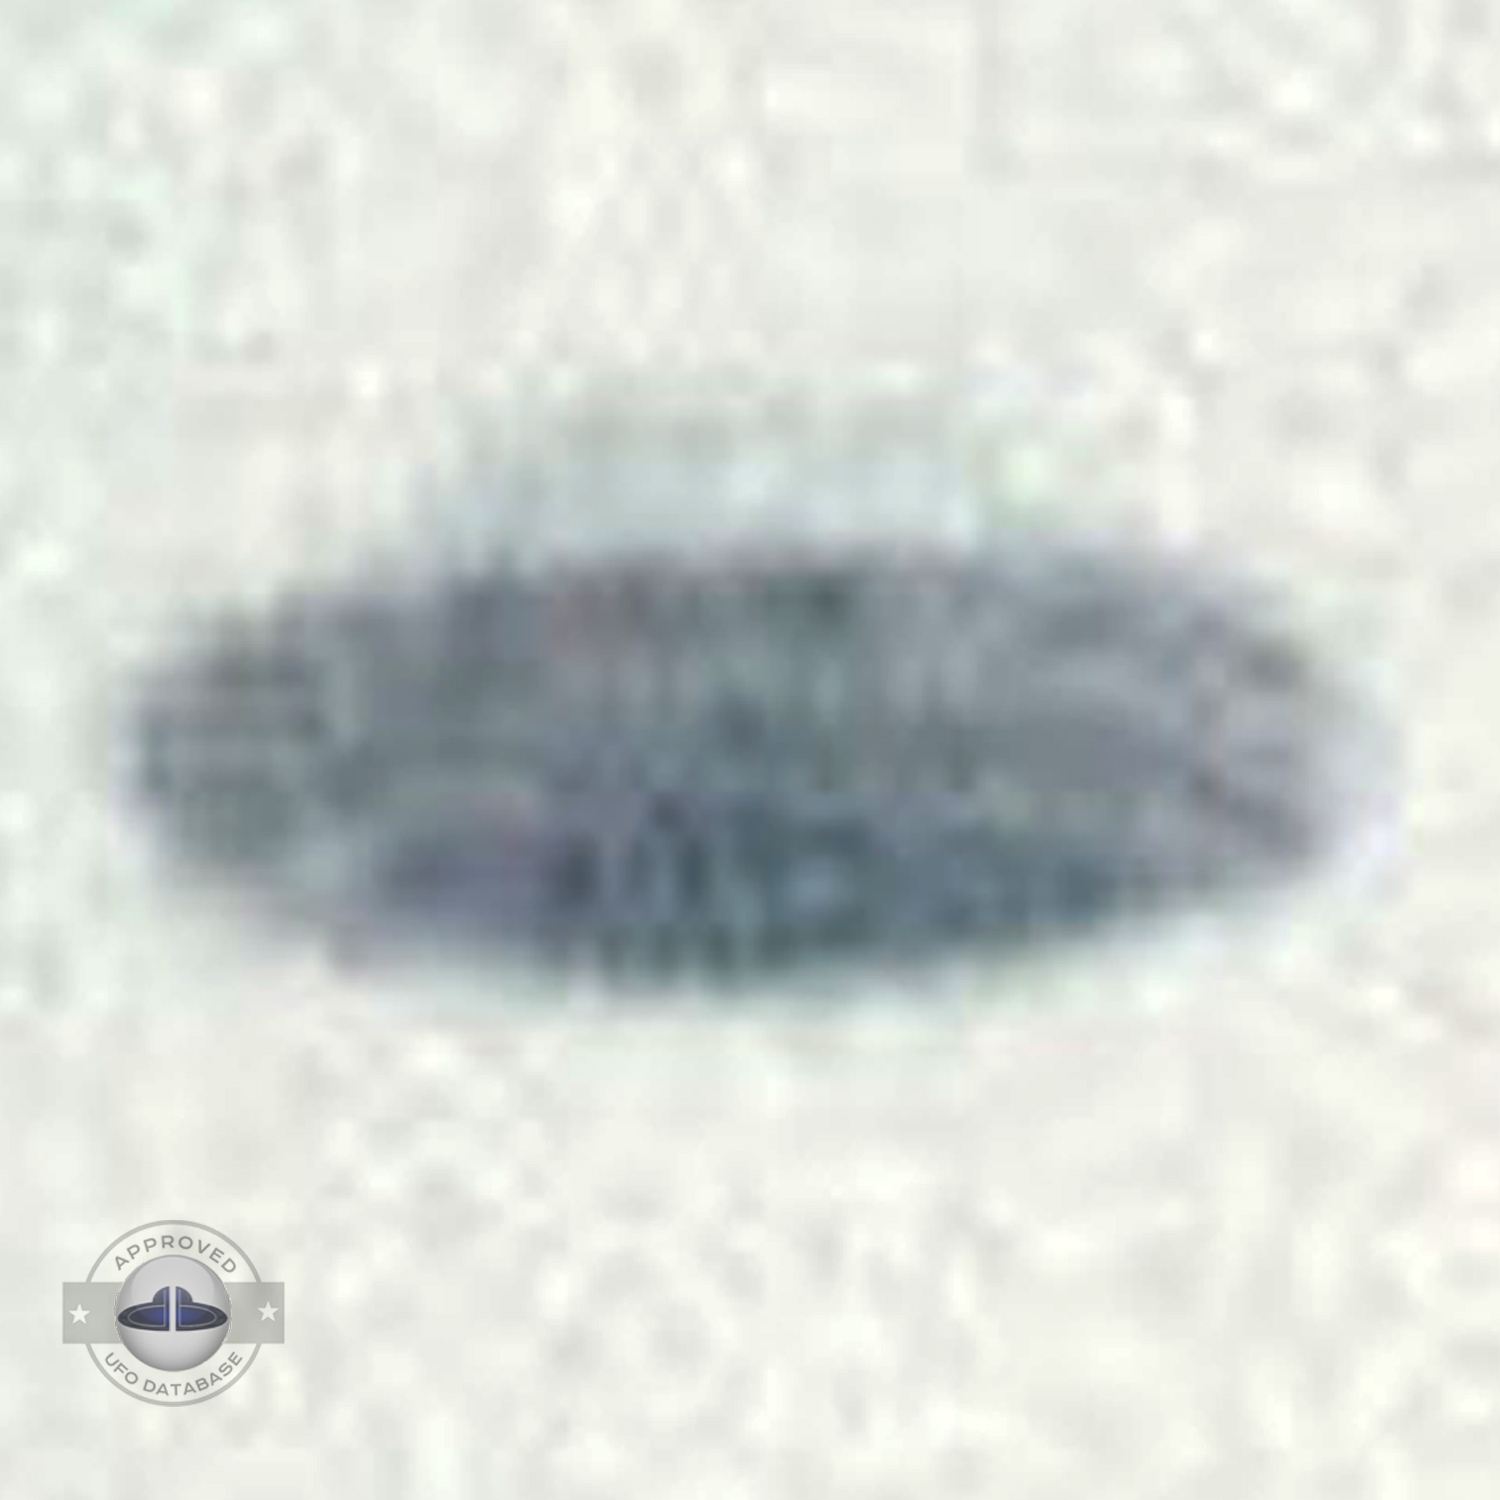 UFO picture showing UFO over snowy mountains during the day UFO Picture #36-5